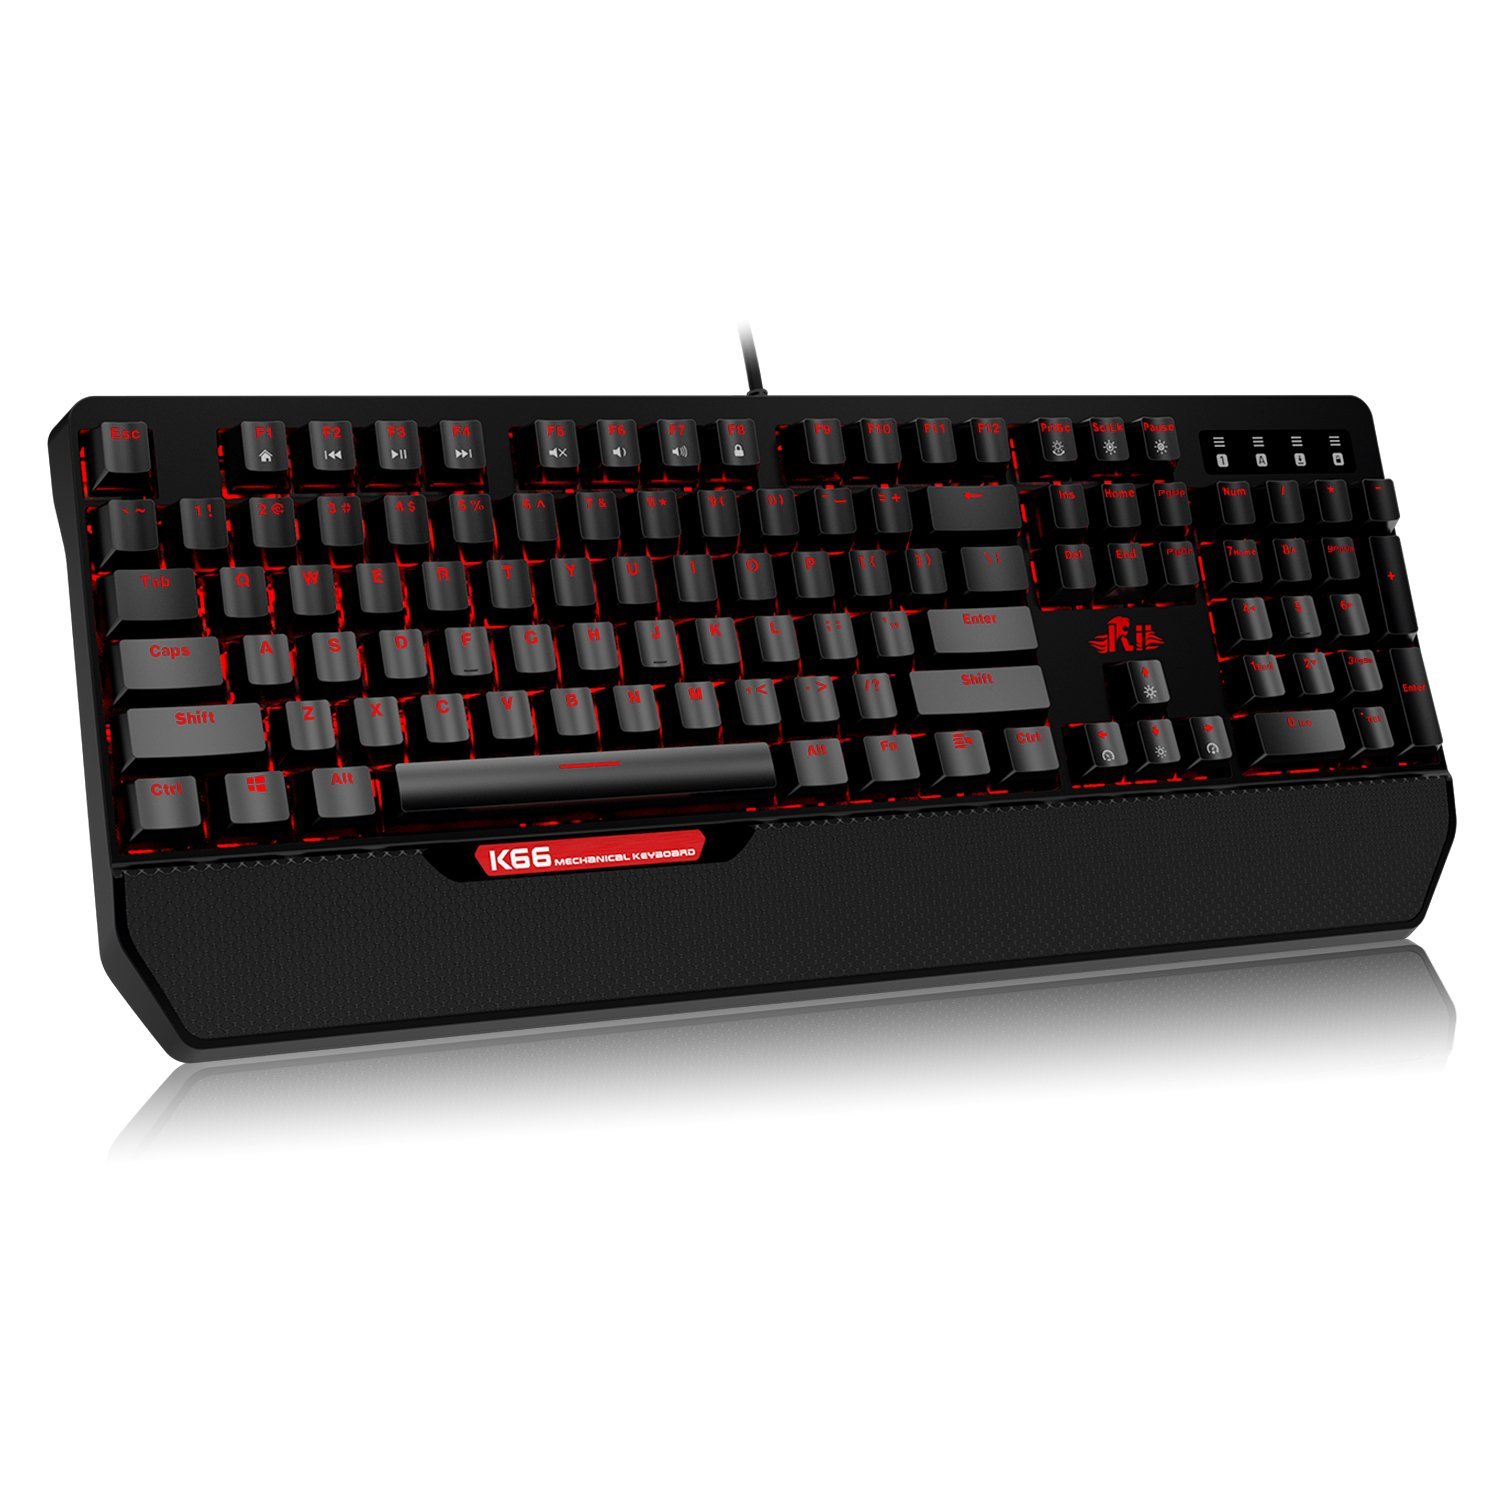 Mechanical Gaming Keyboard USB Wired Anti-ghosting with Backlit LED $28